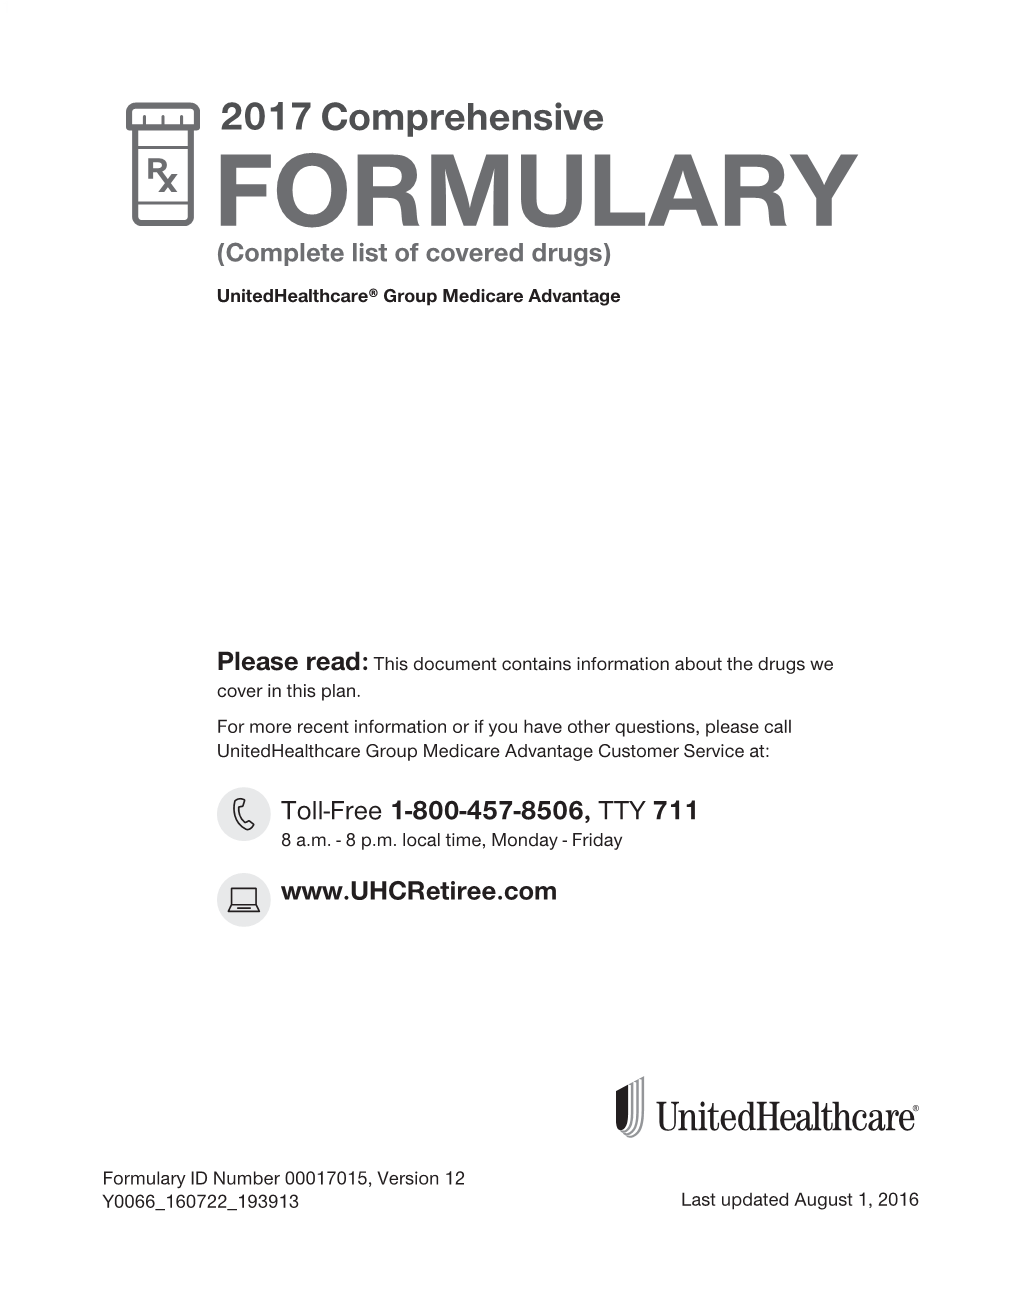 FORMULARY (Complete List of Covered Drugs)